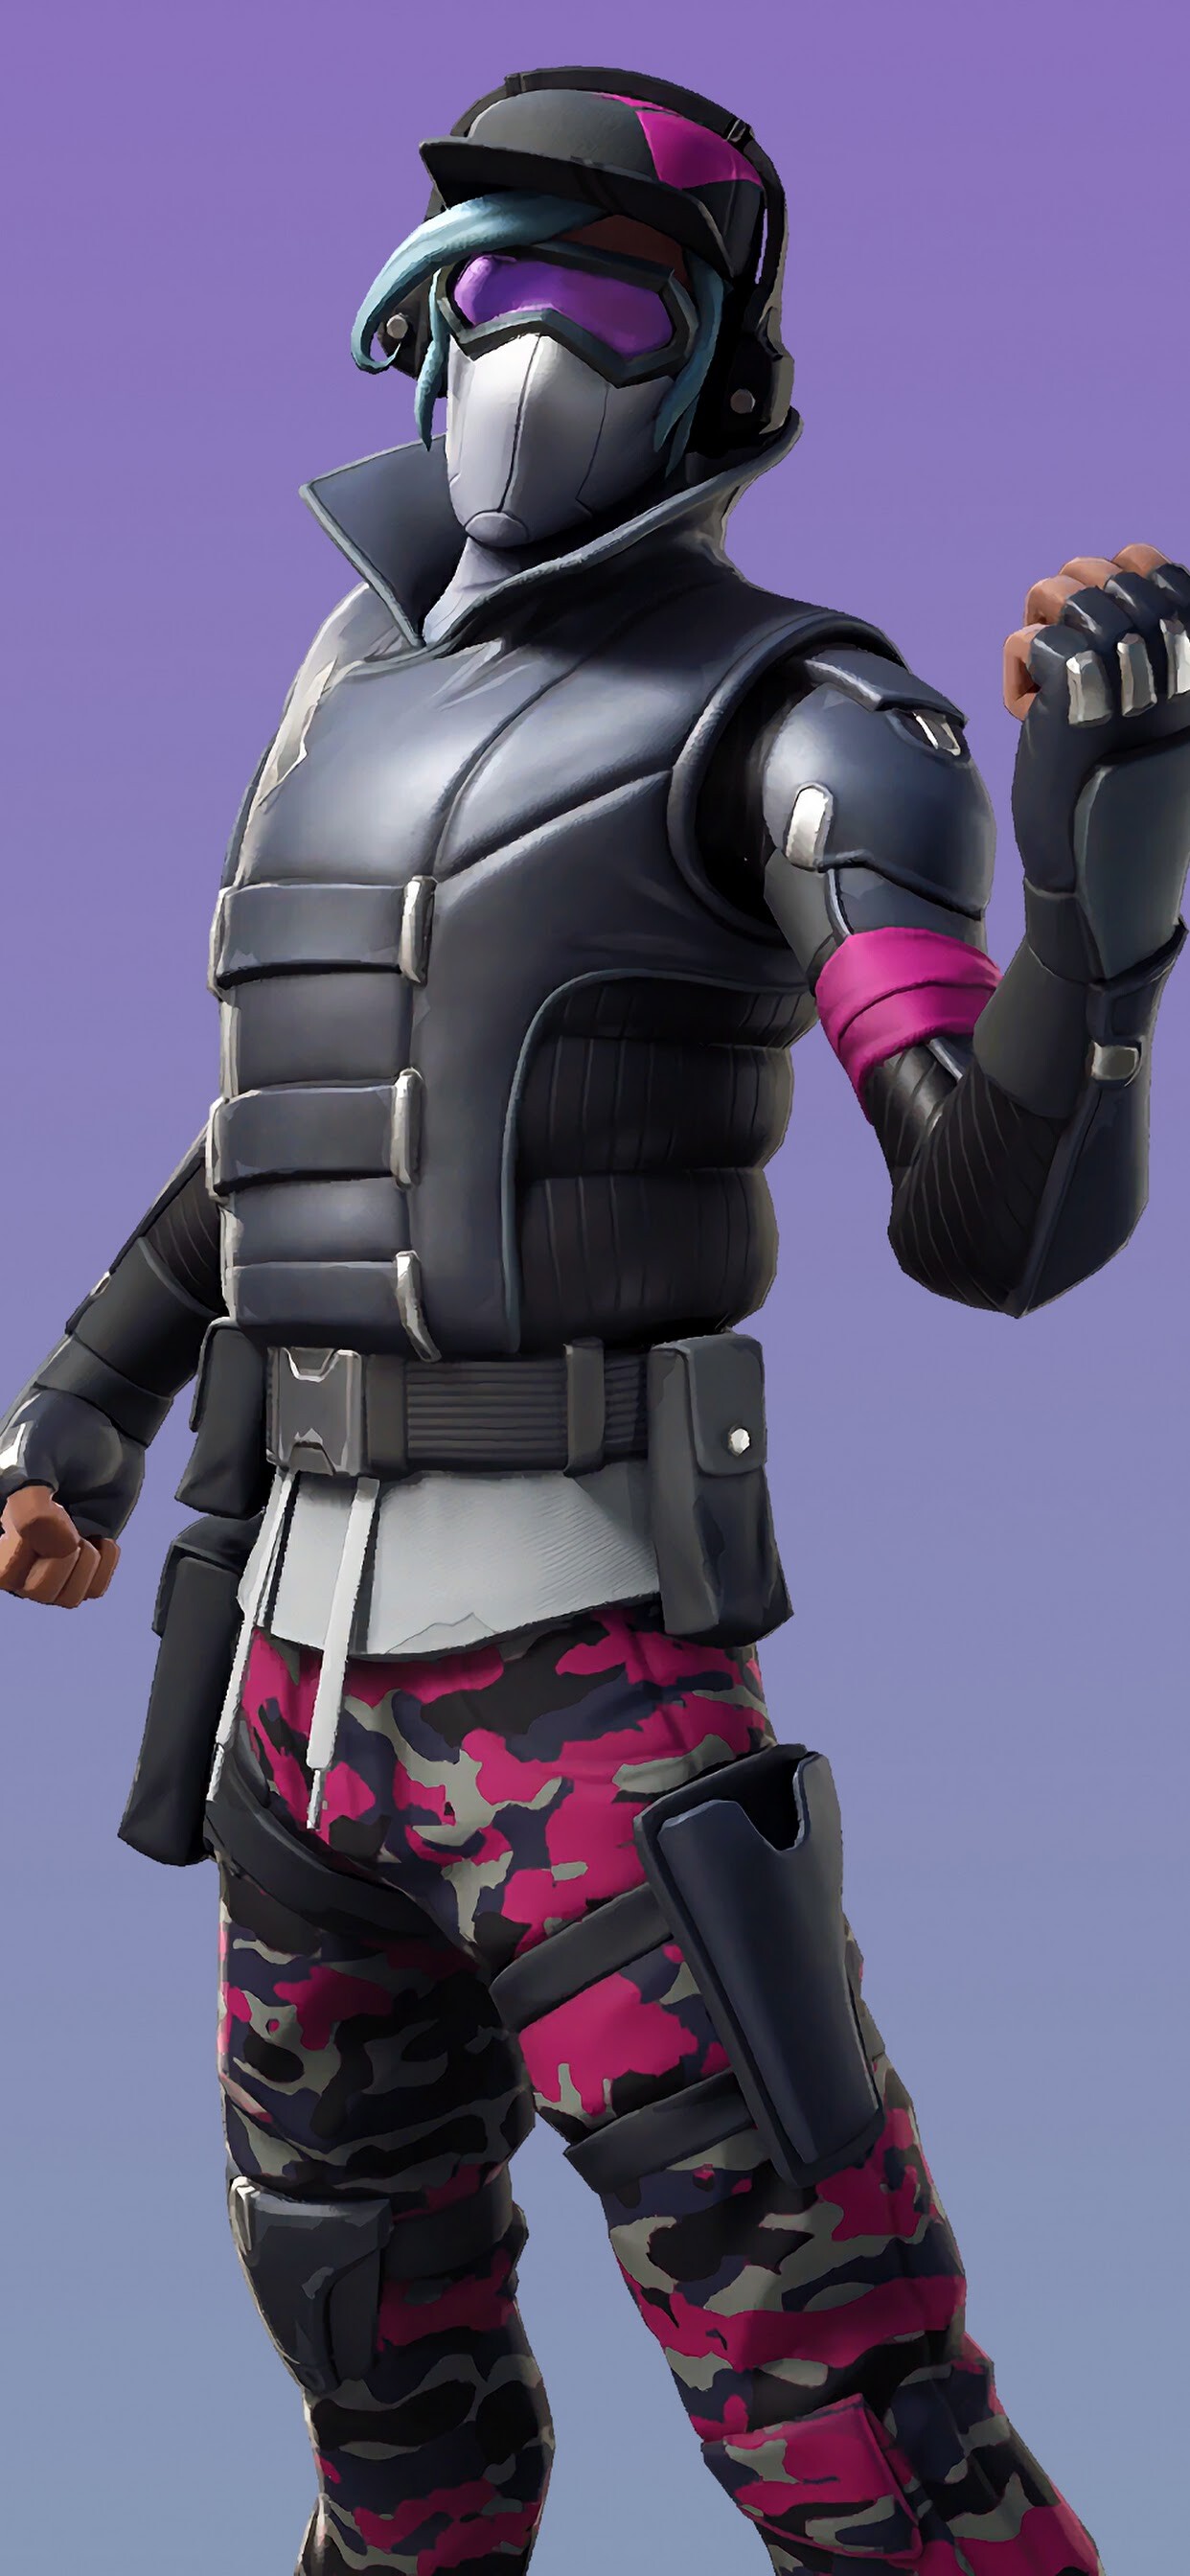 Fortnite: Fortnite Gage Skin Outfit, Chapter 1 Season 9, An Uncommon Outfit. 1250x2690 HD Wallpaper.